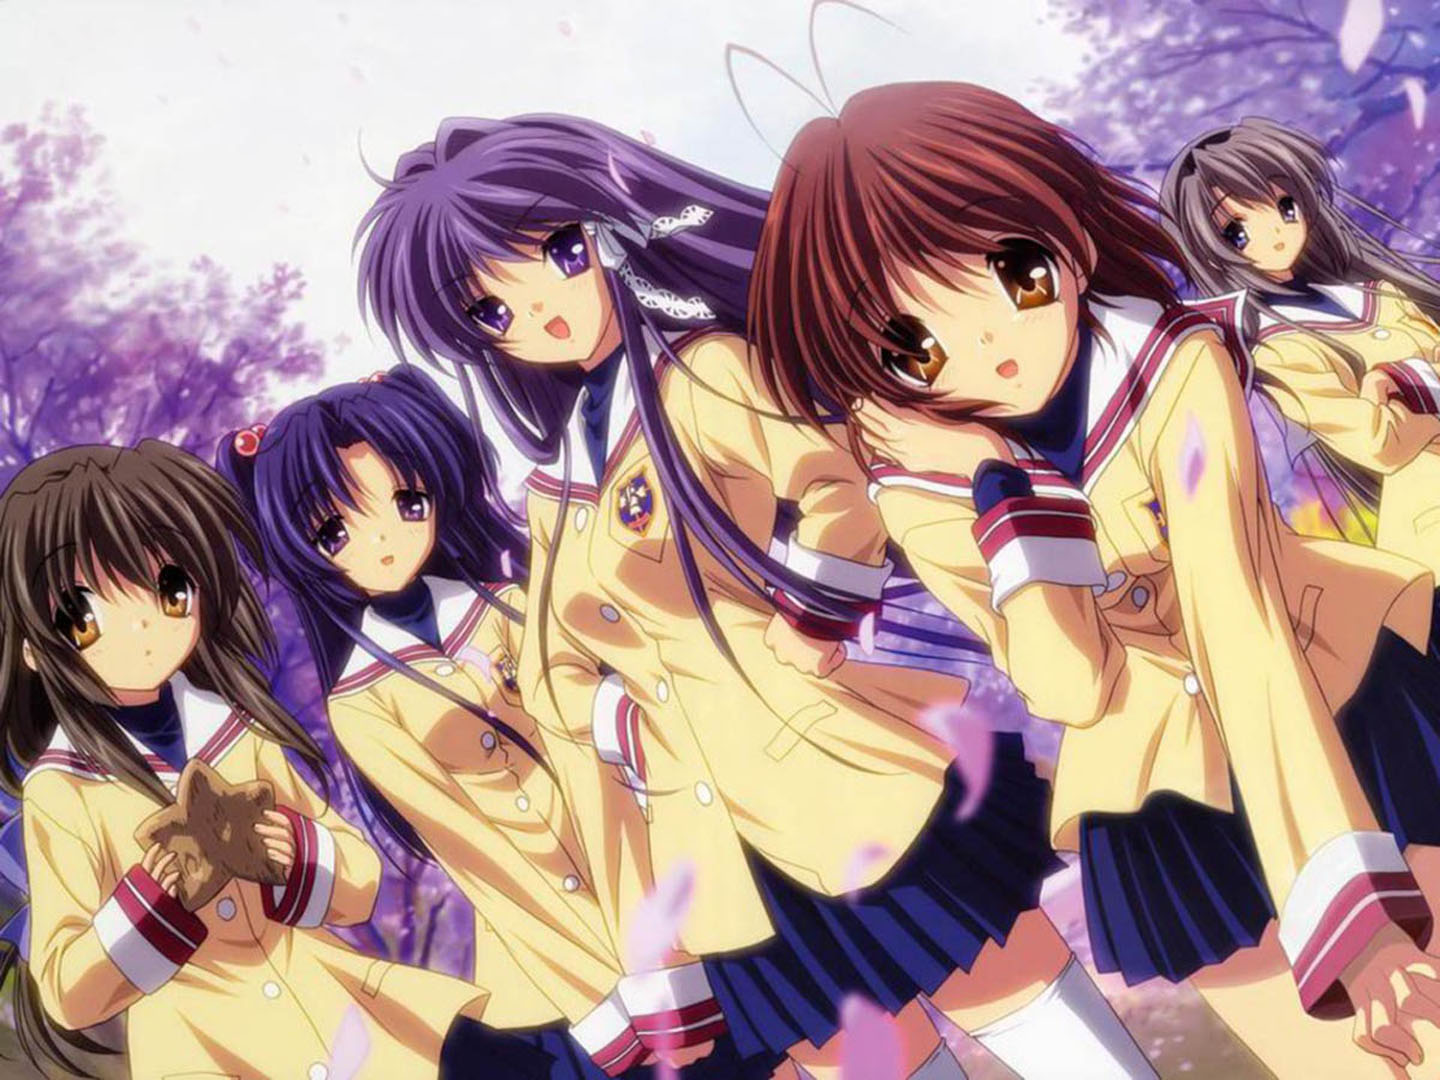 Clannad is Life - Tokyo Buzz Clips